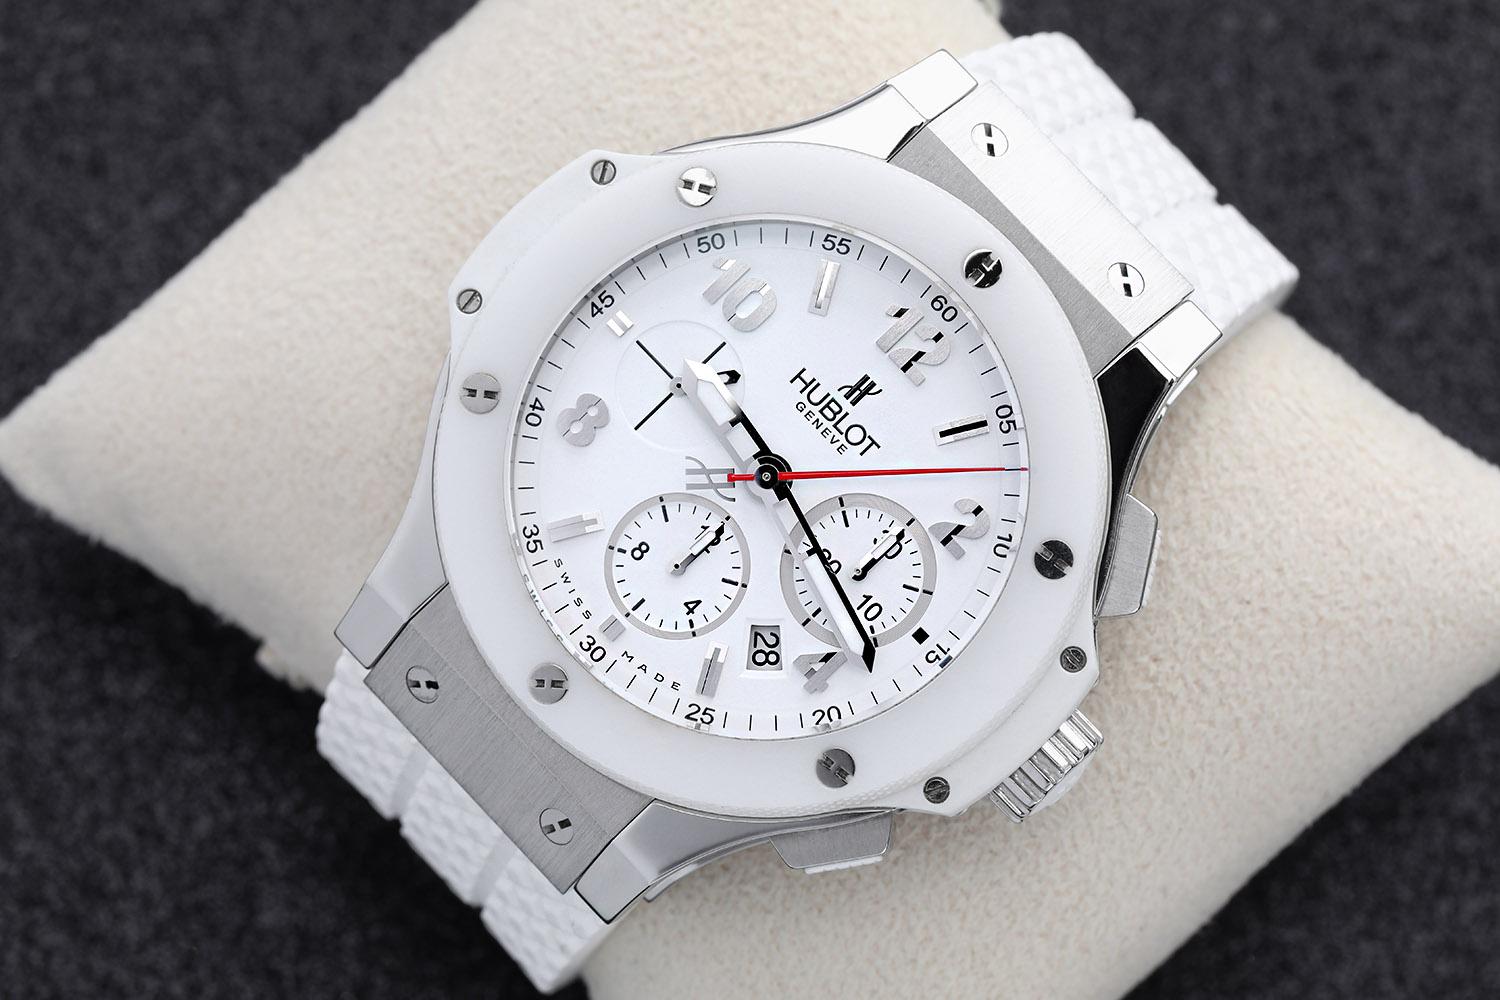 Watch has absolutely NO visible scratches or blemishes. It is in MINT CONDITION. Comes with Hublot Box and Papers. Stainless steel case with a white rubber strap. Fixed white ceramic bezel. White dial with luminous silver-tone skeleton hands and